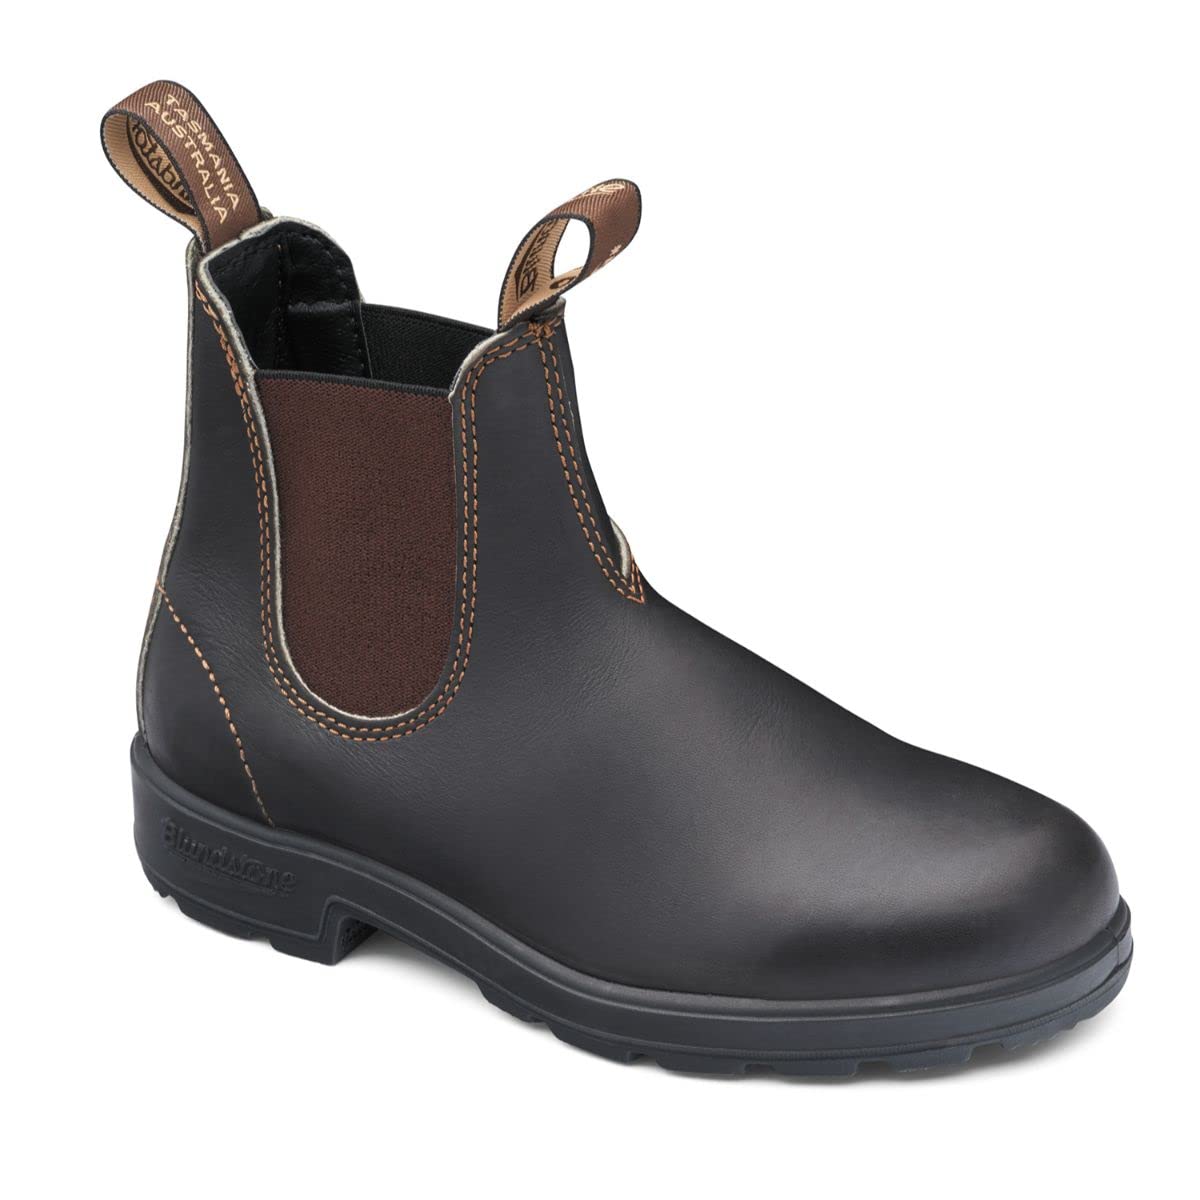 Blundstone Unisex 550 Rugged Lux Boot